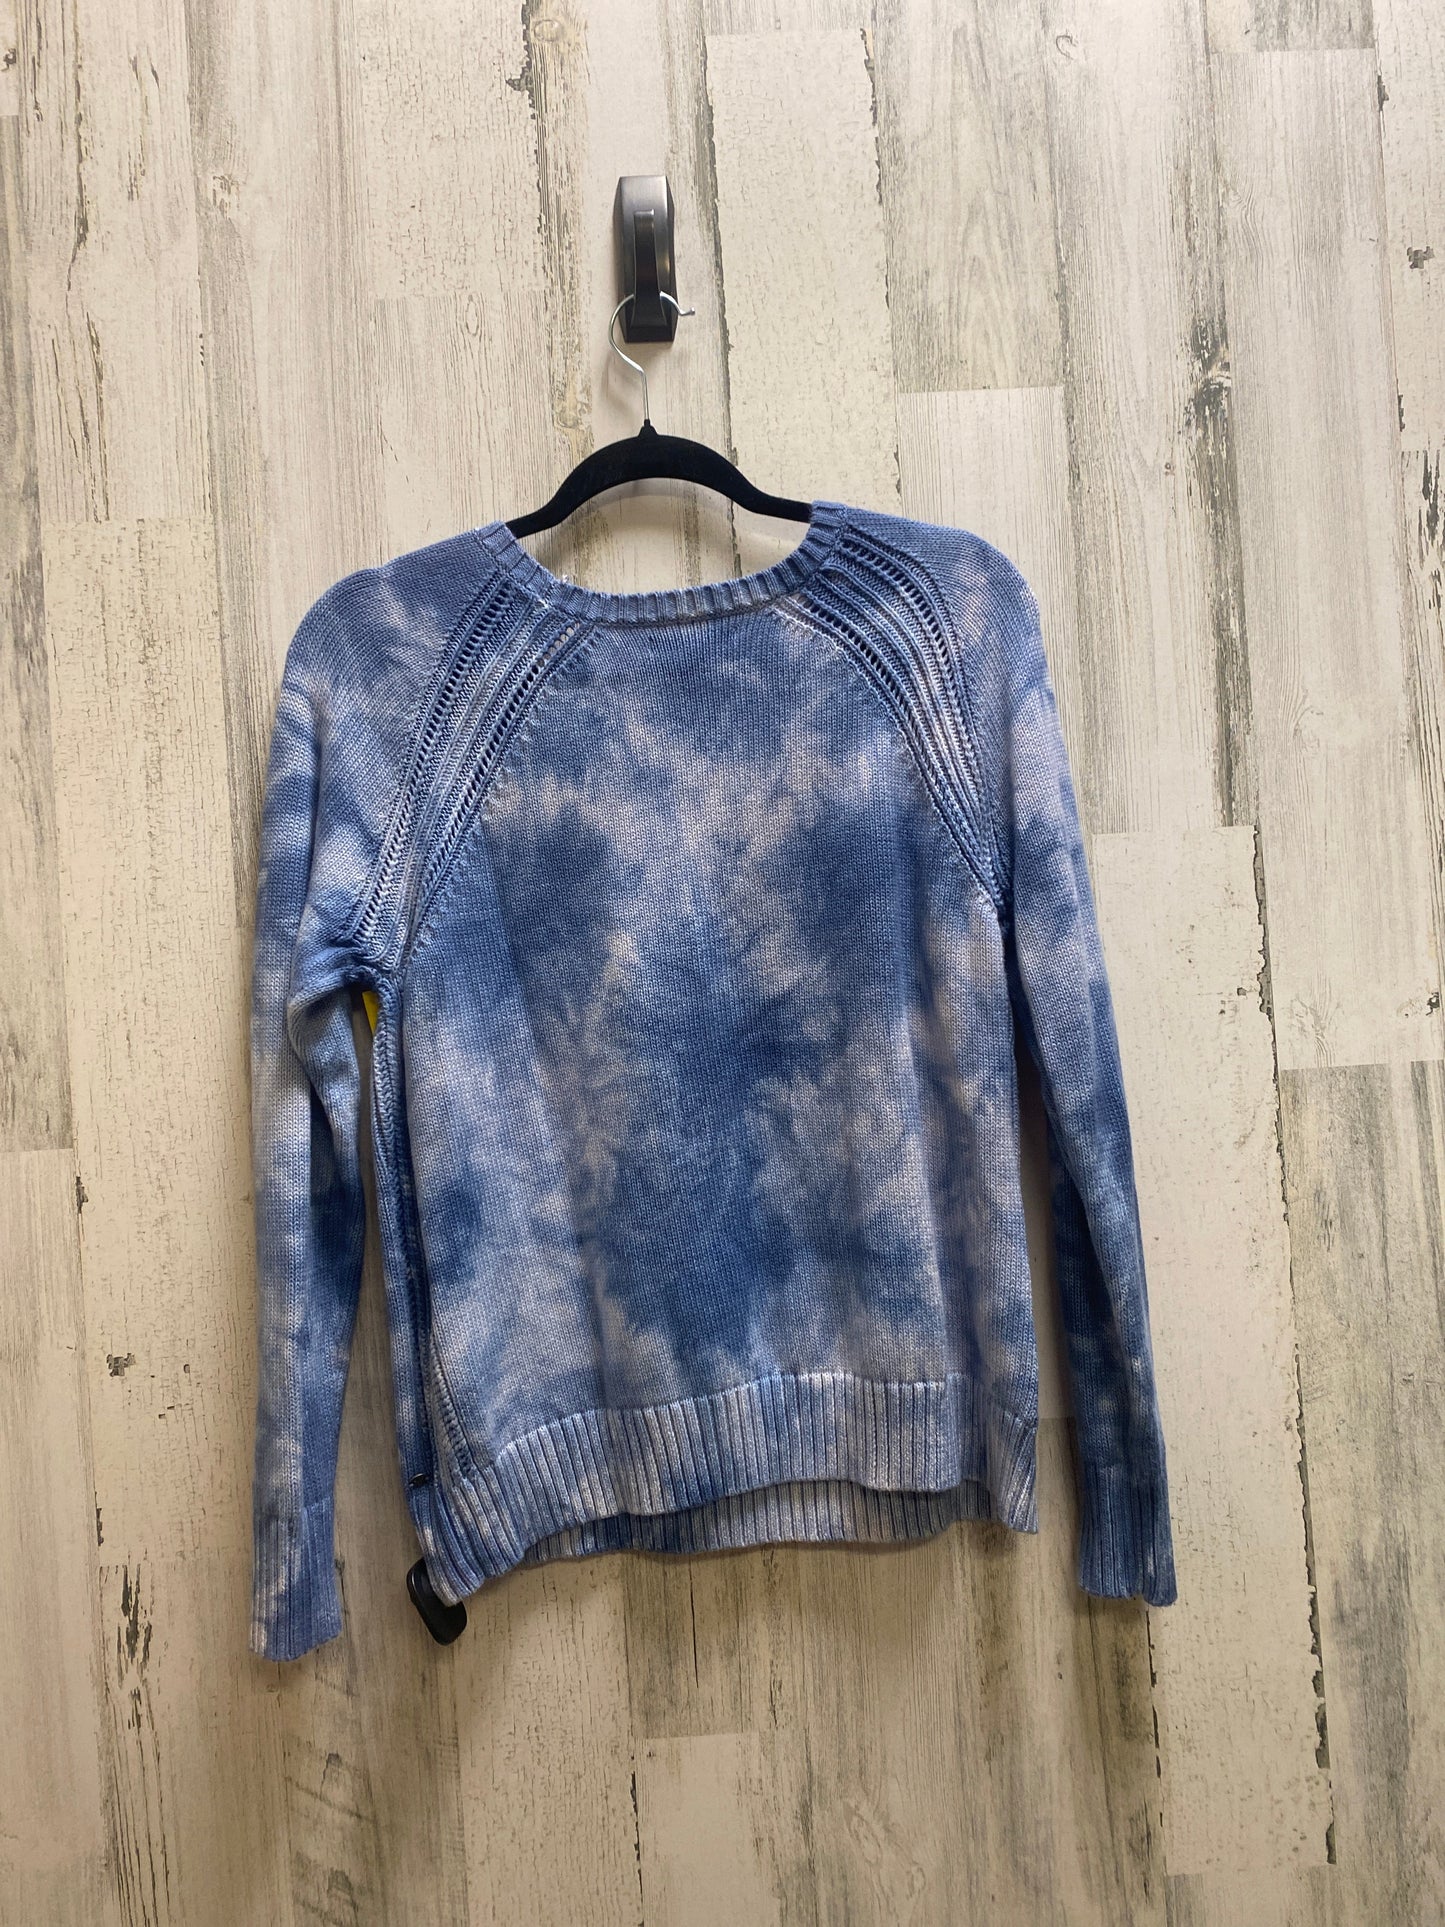 Sweater By American Eagle  Size: L